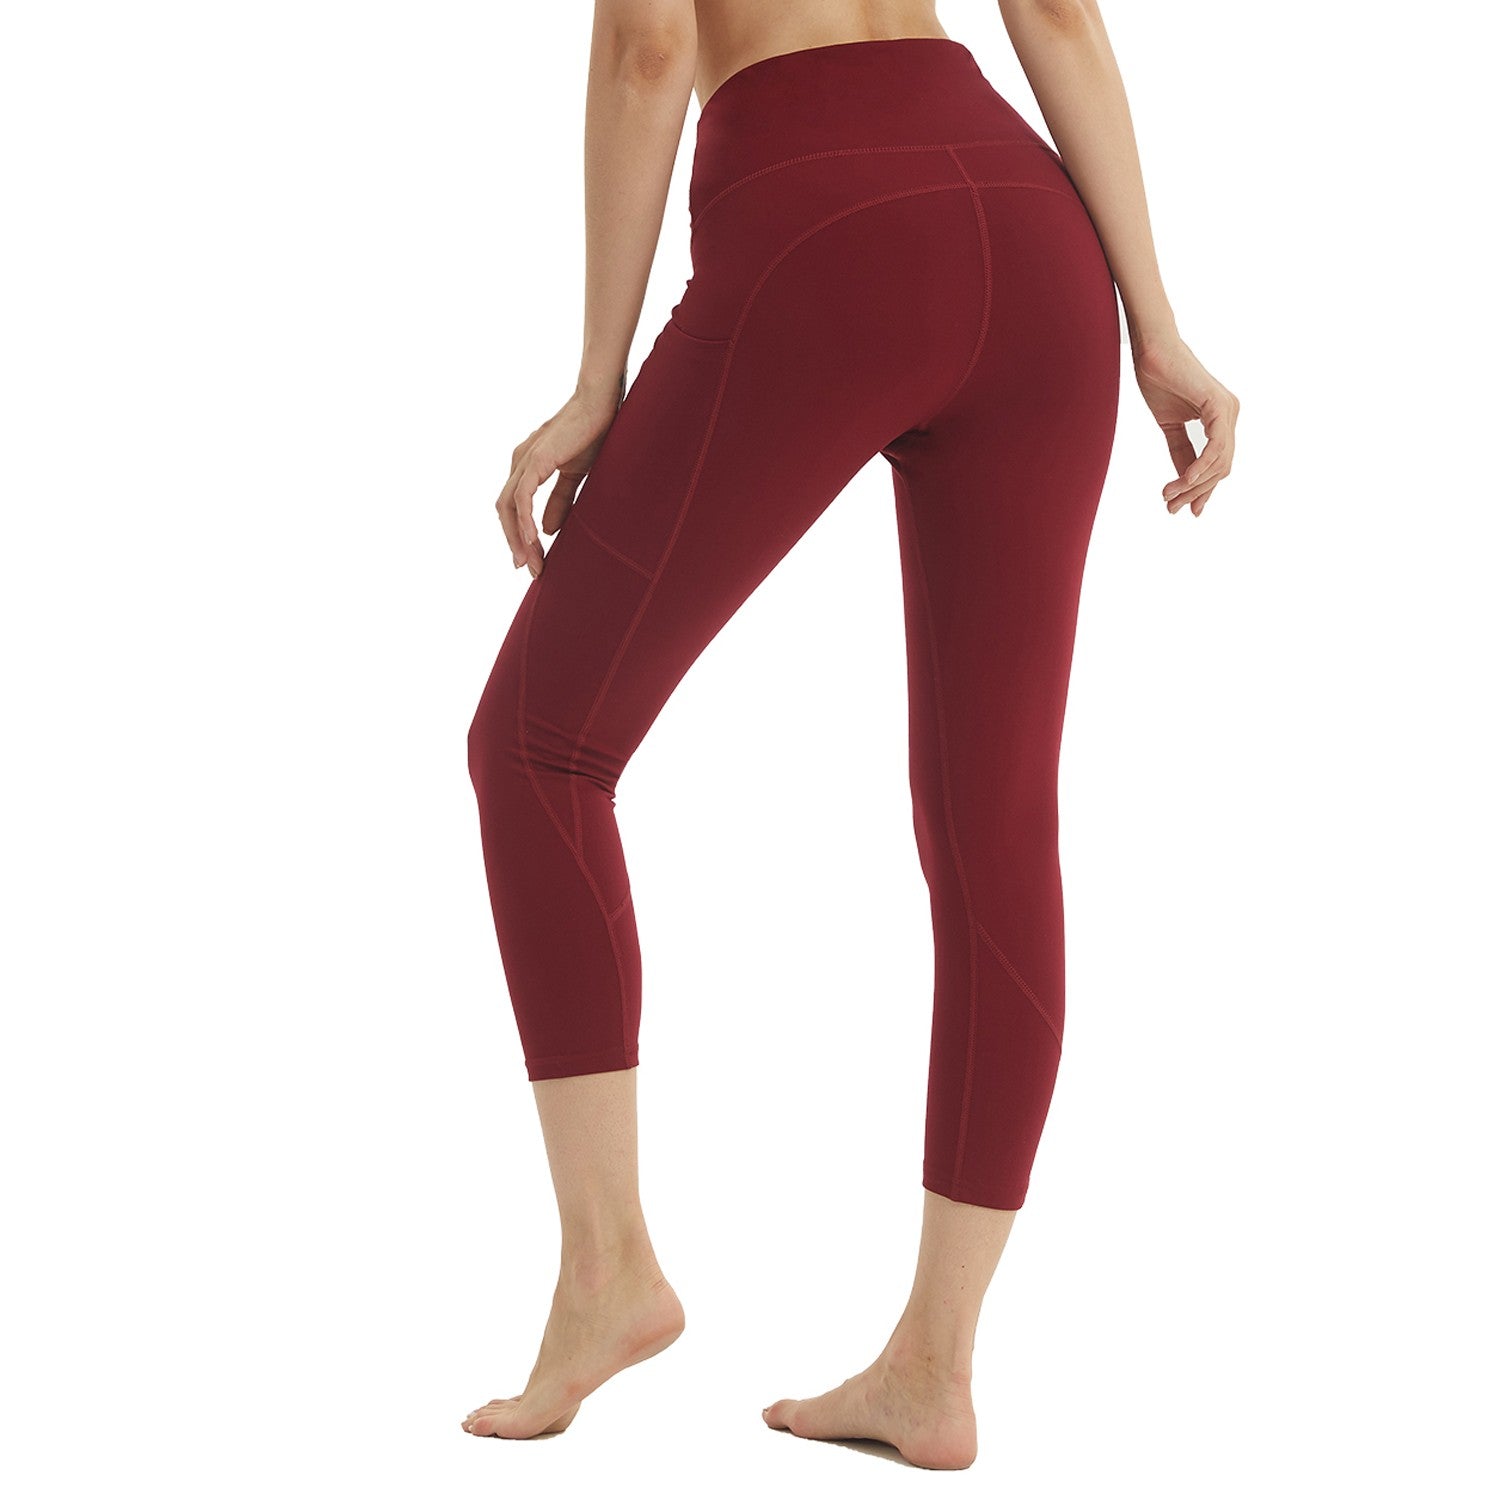  GAYHAY High Waisted Capri Leggings For Women - Soft Slim  Tummy Control - Exercise Pants For Running Cycling Yoga Workout